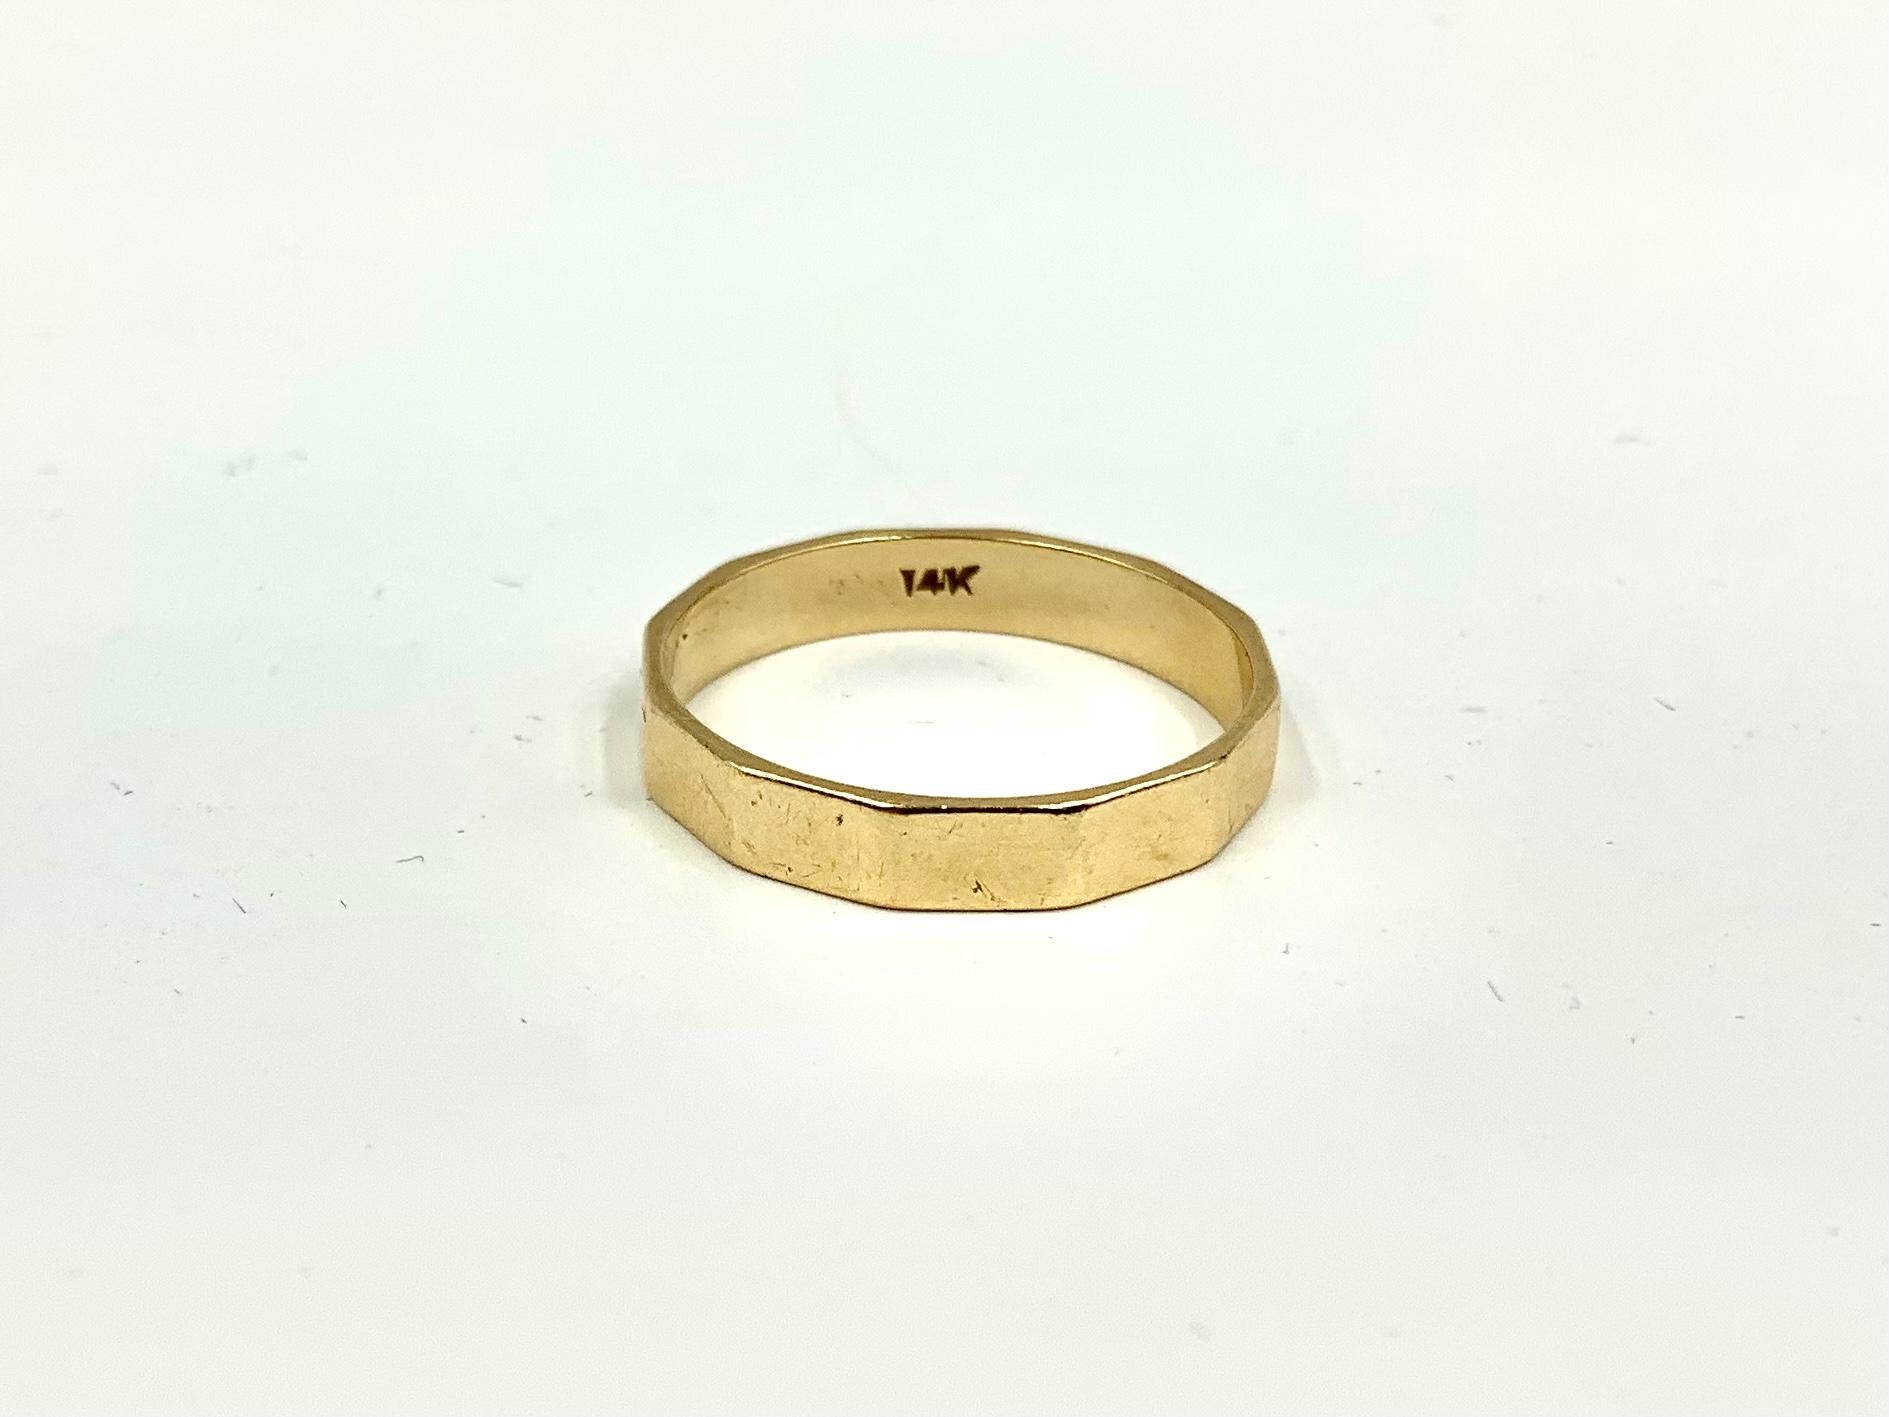 Vintage 1960s Modernist Dodecagon 14k Yellow Gold Band Rind For Sale 5